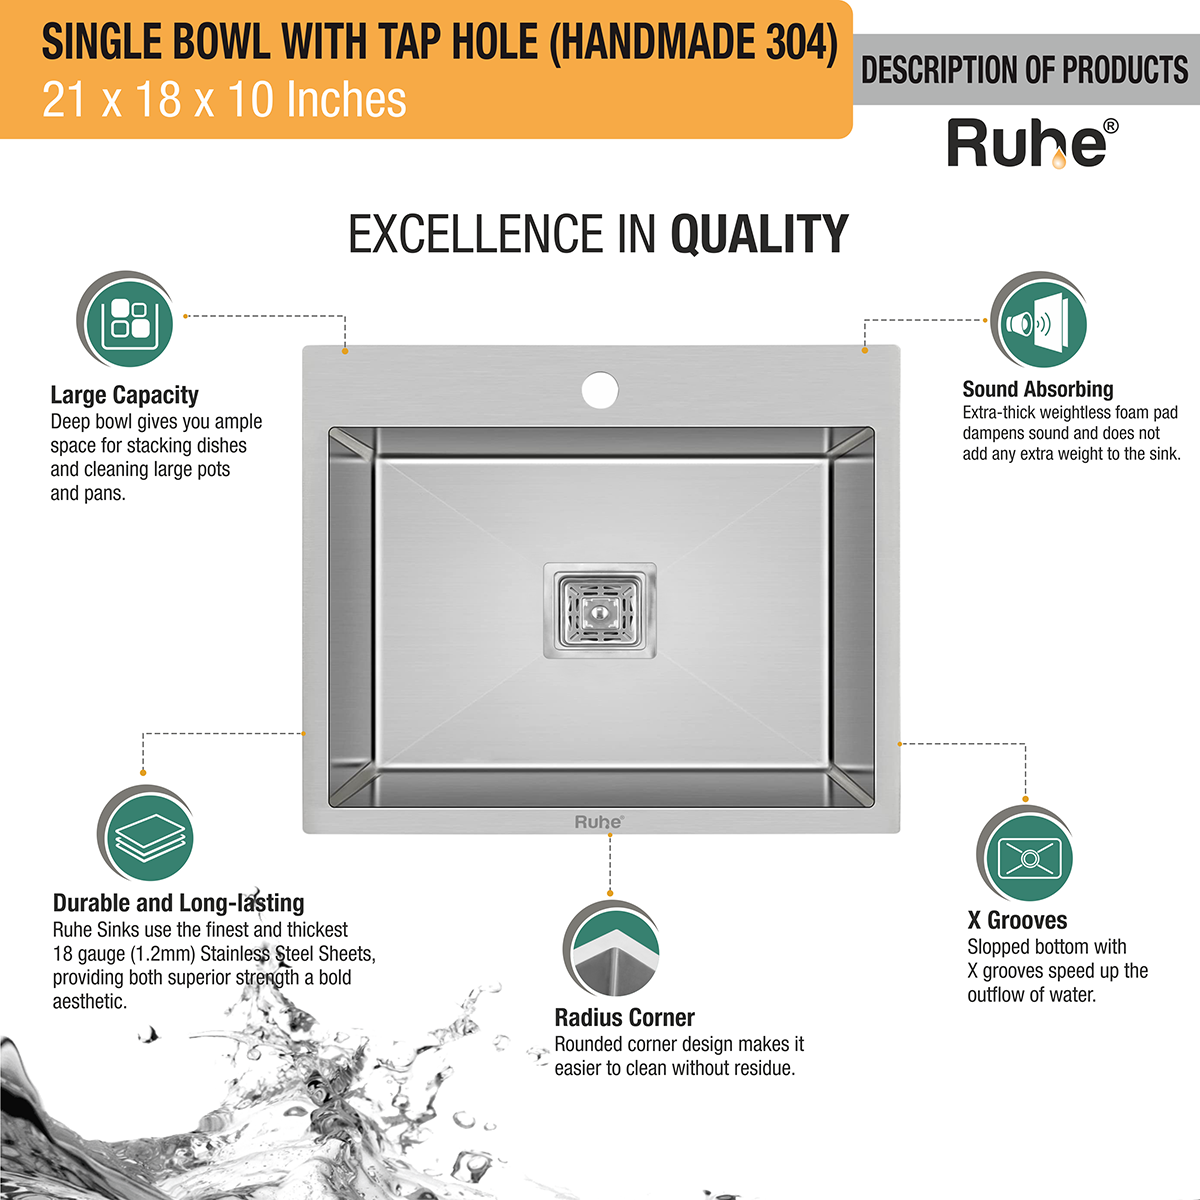 Handmade Single Bowl 304-Grade Kitchen Sink (21 x 18 x 10 Inches) with Tap Hole quality products